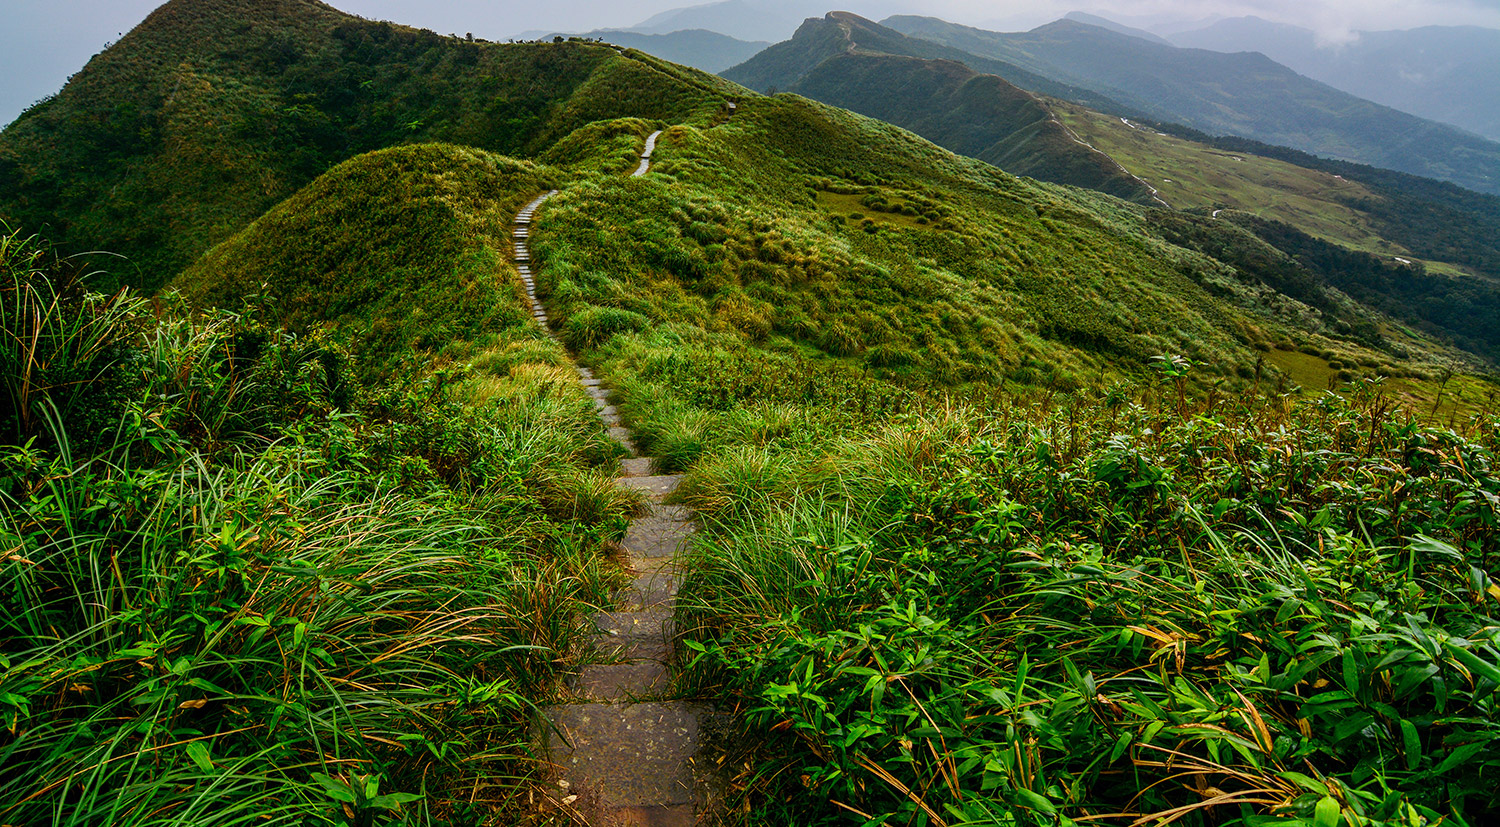 A picture of a big lush green mountain with other mountains in the background. There is a path of stairs leading down the mountain and far into the distance.